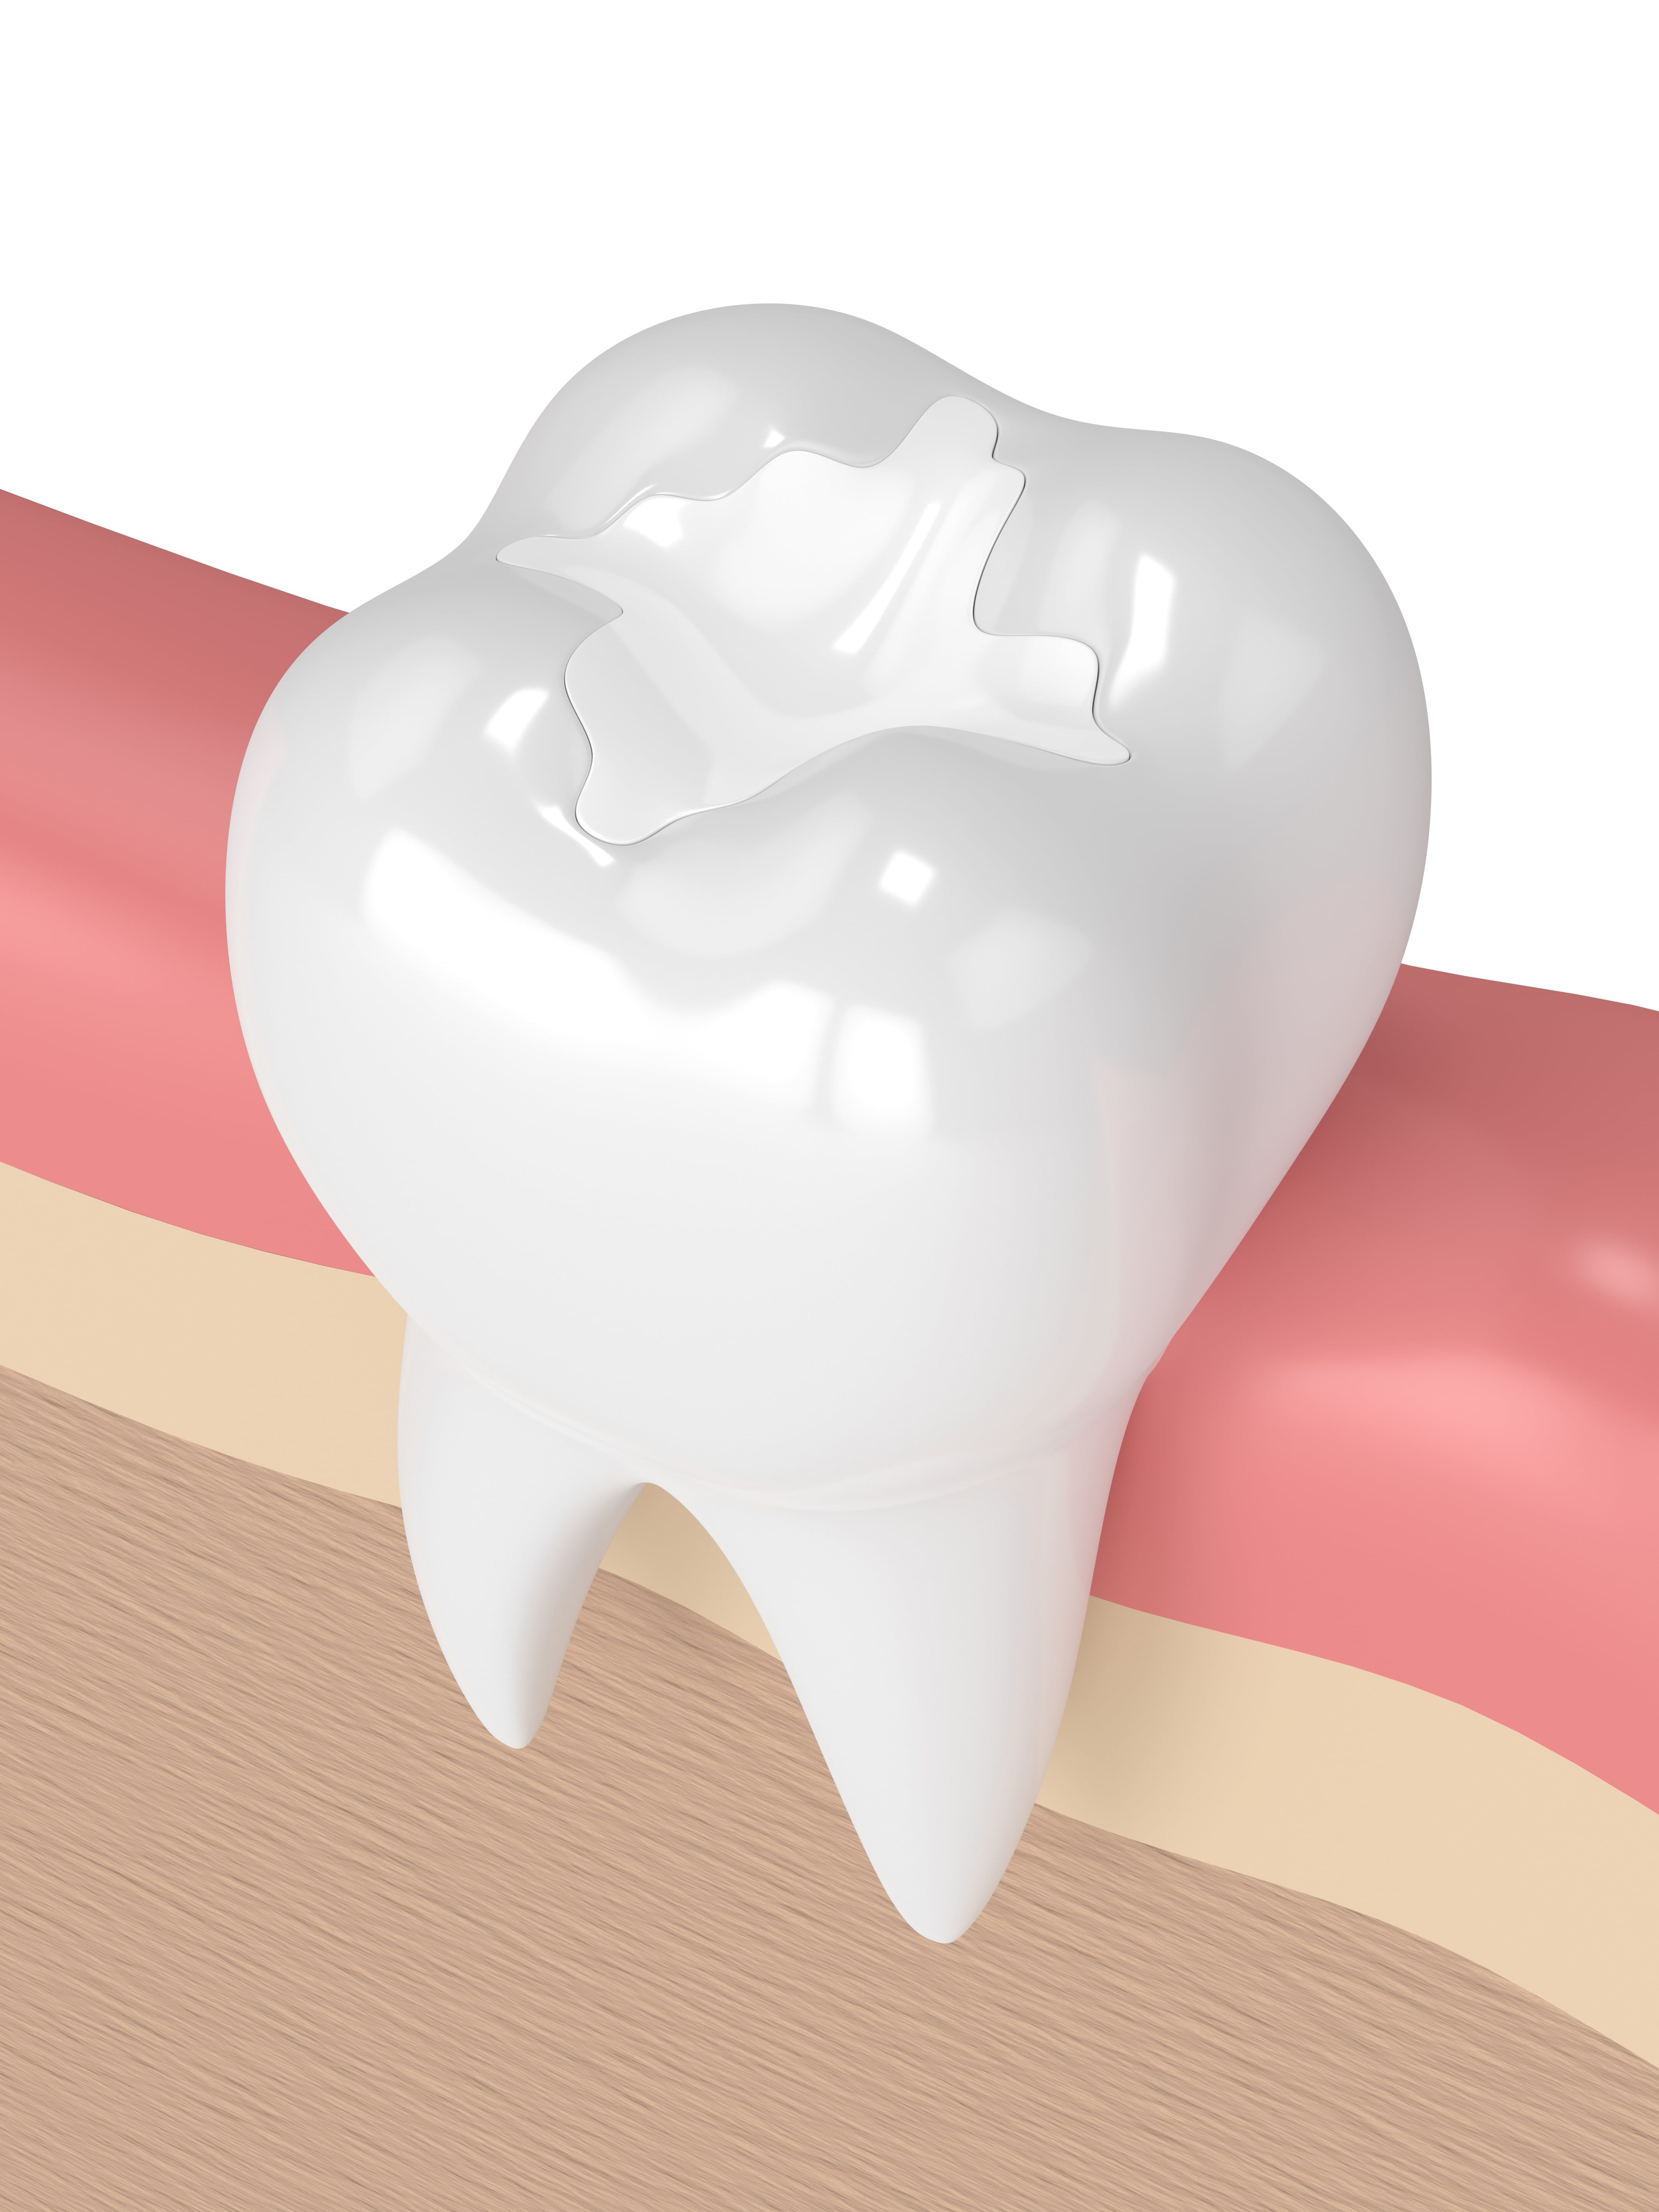 3-D image of a composite filling in a tooth